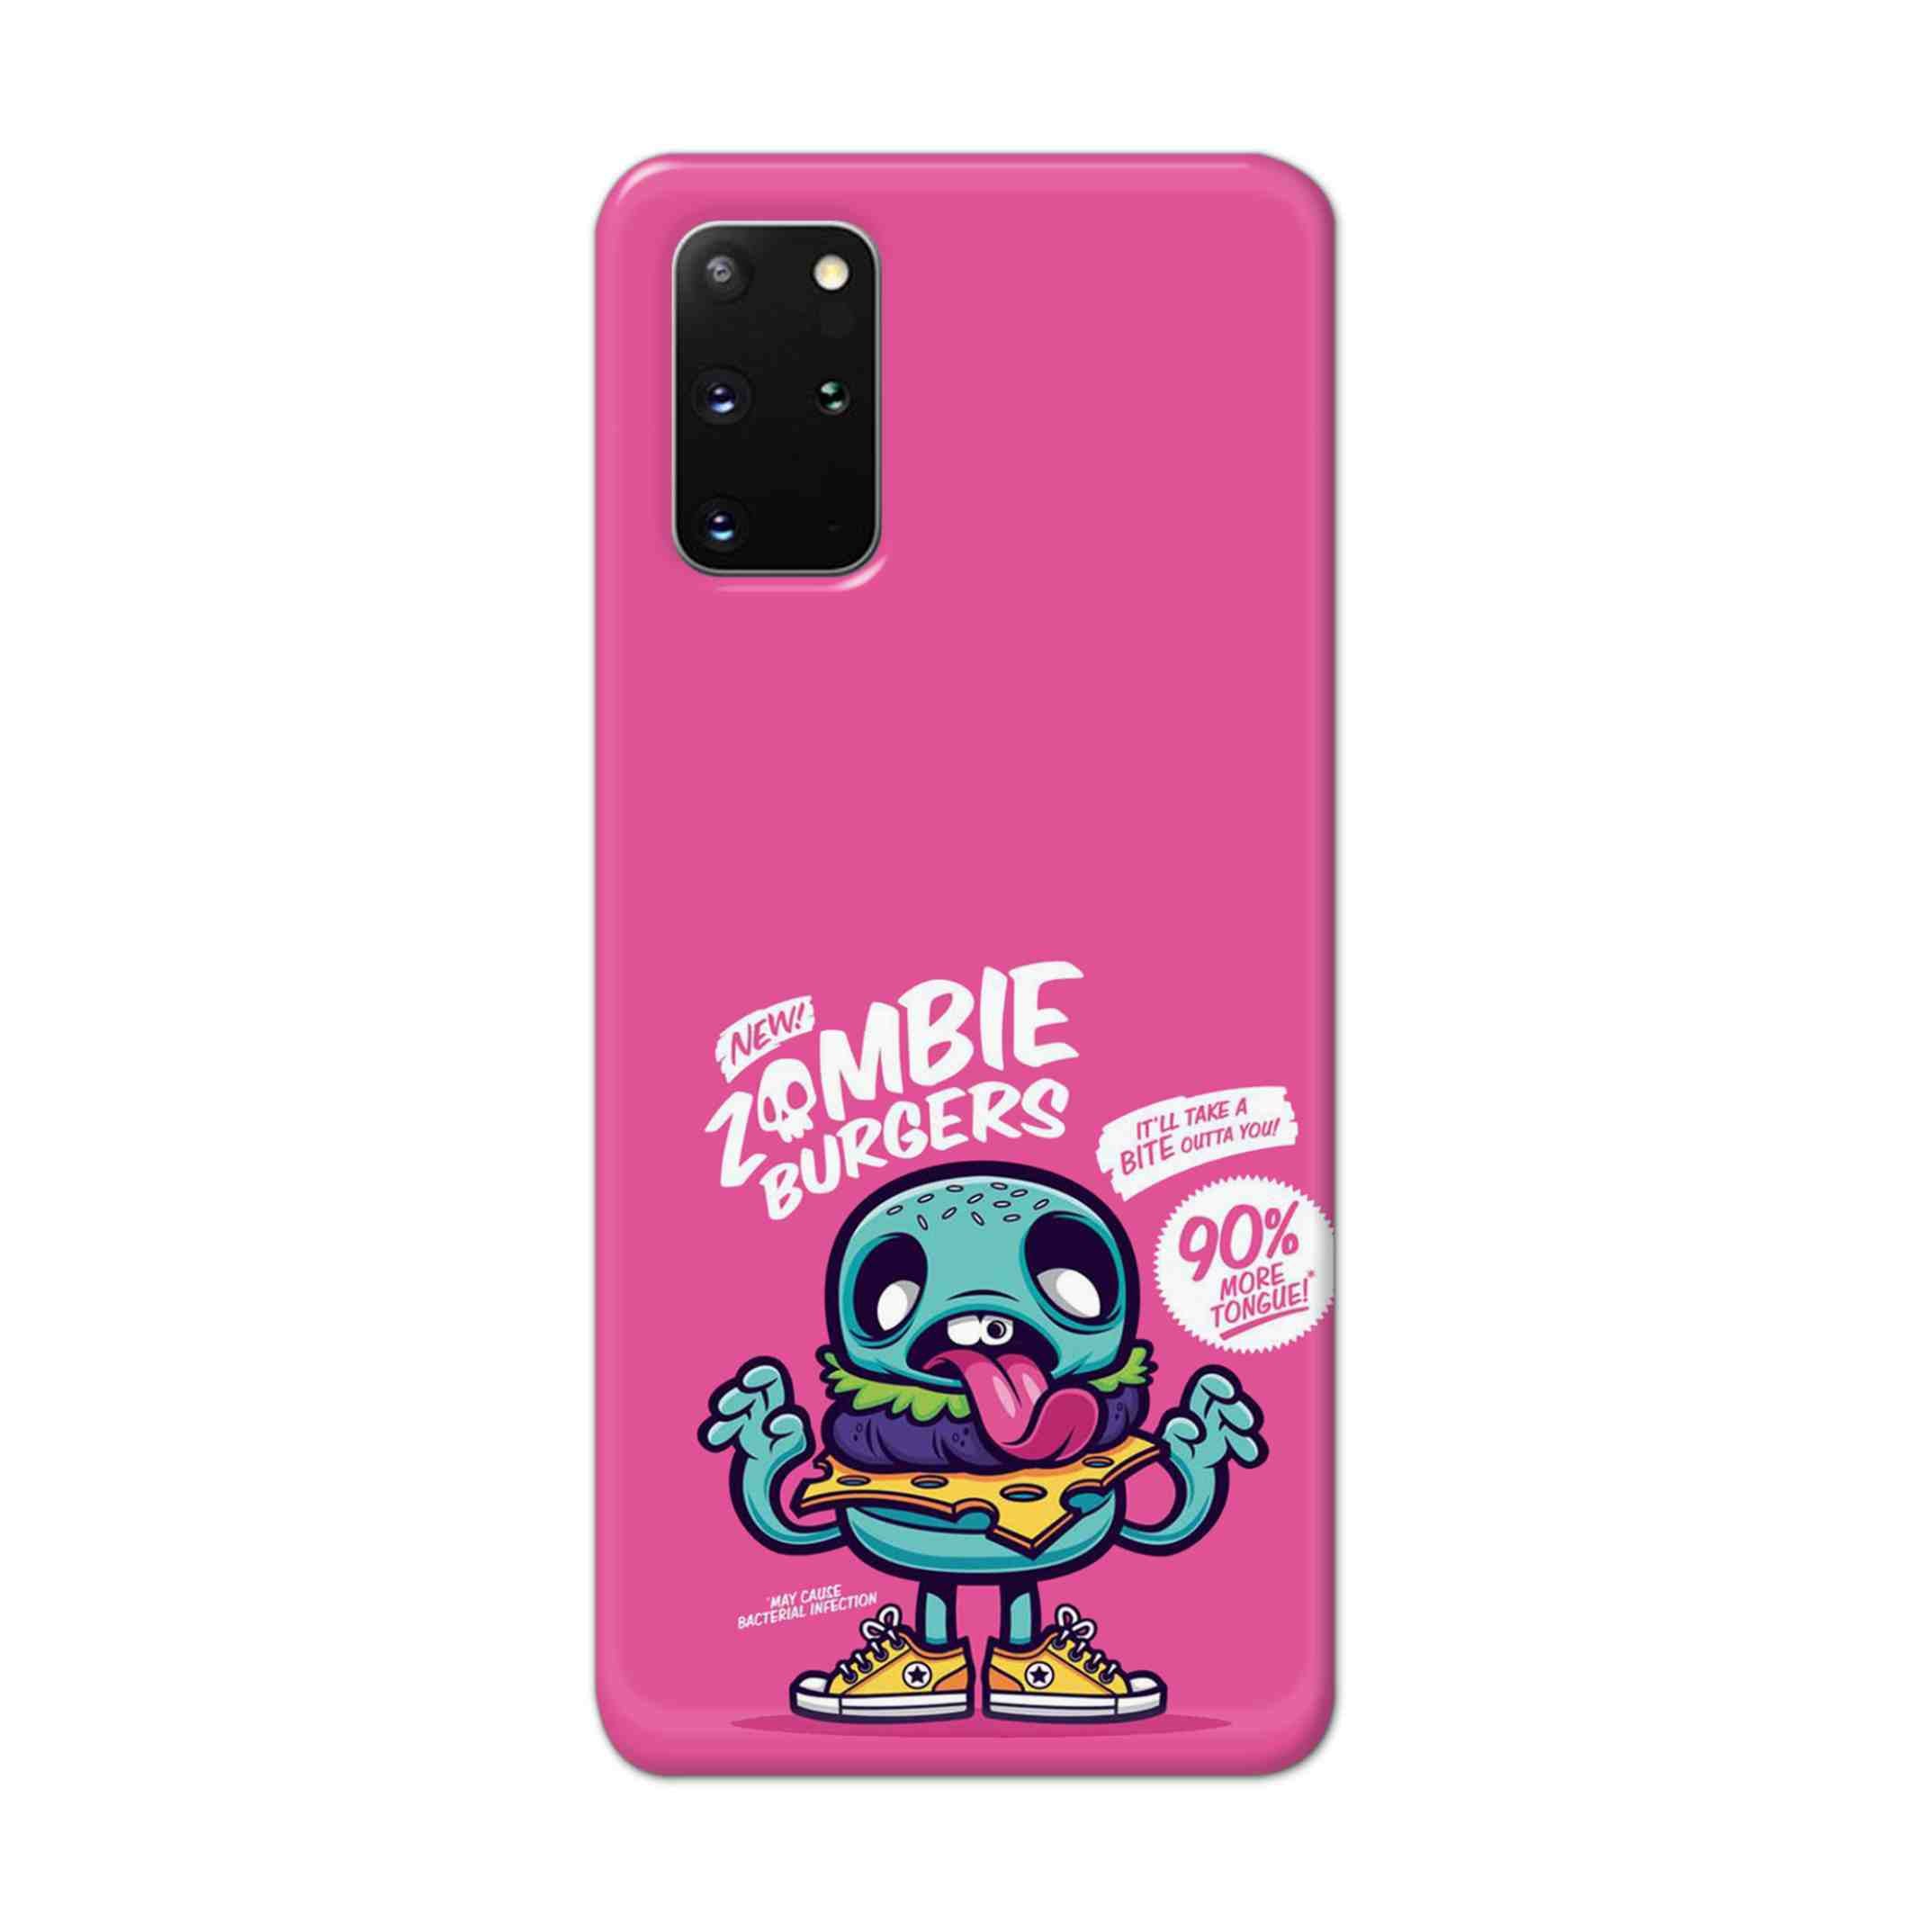 Buy New Zombie Burgers Hard Back Mobile Phone Case Cover For Samsung Galaxy S20 Plus Online